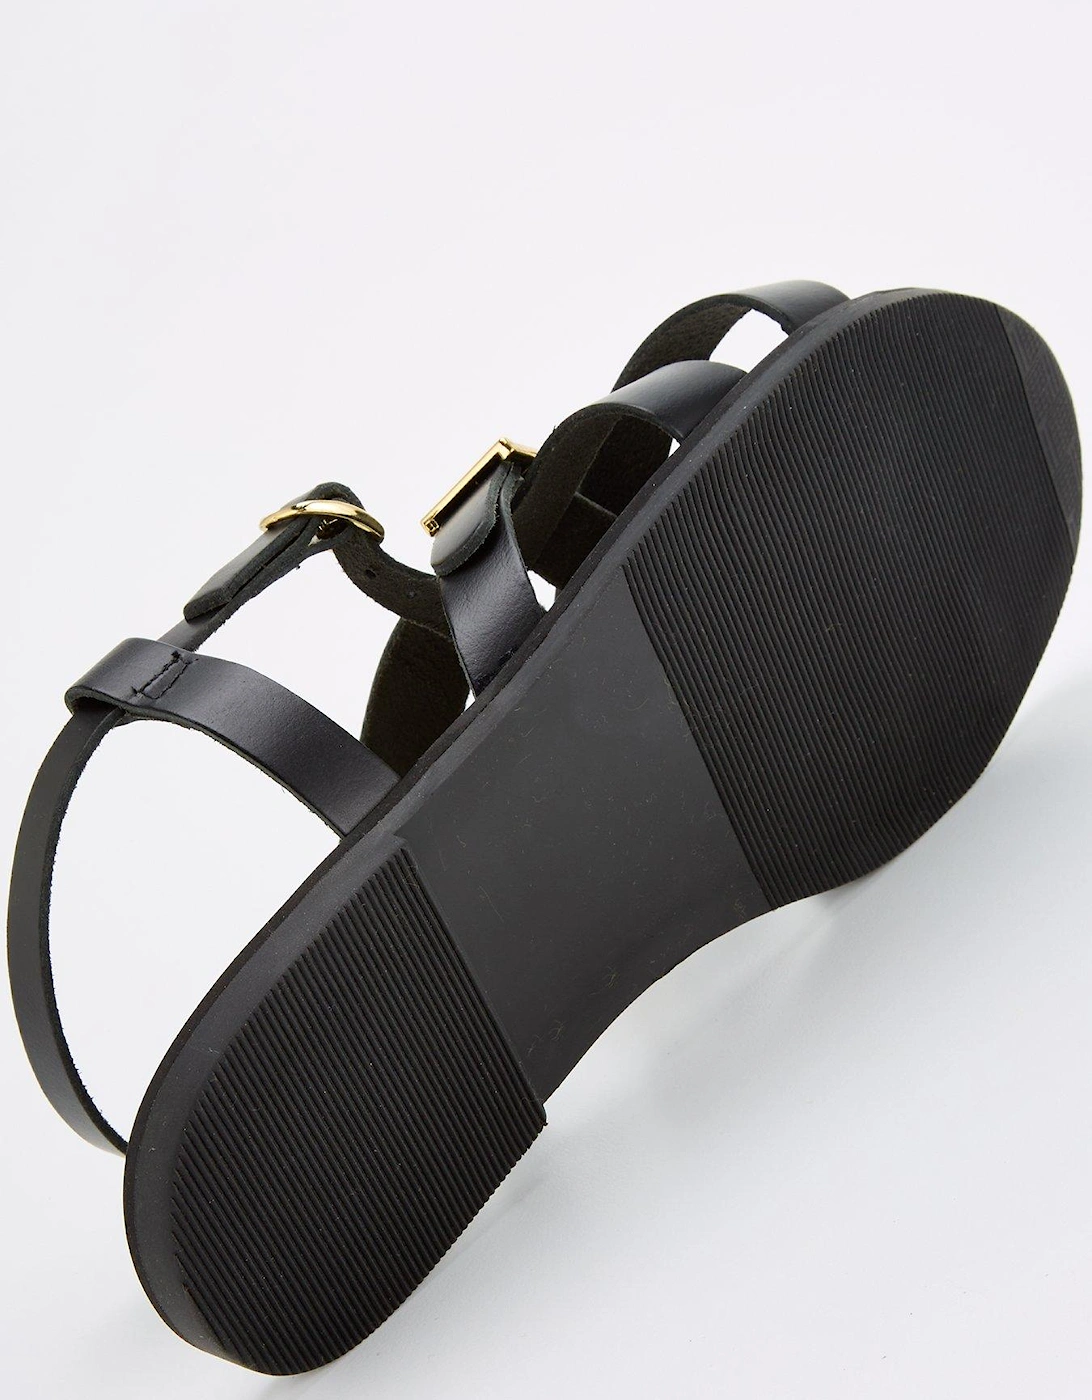 Wide Fit Leather Buckle Strappy Sandal - Black